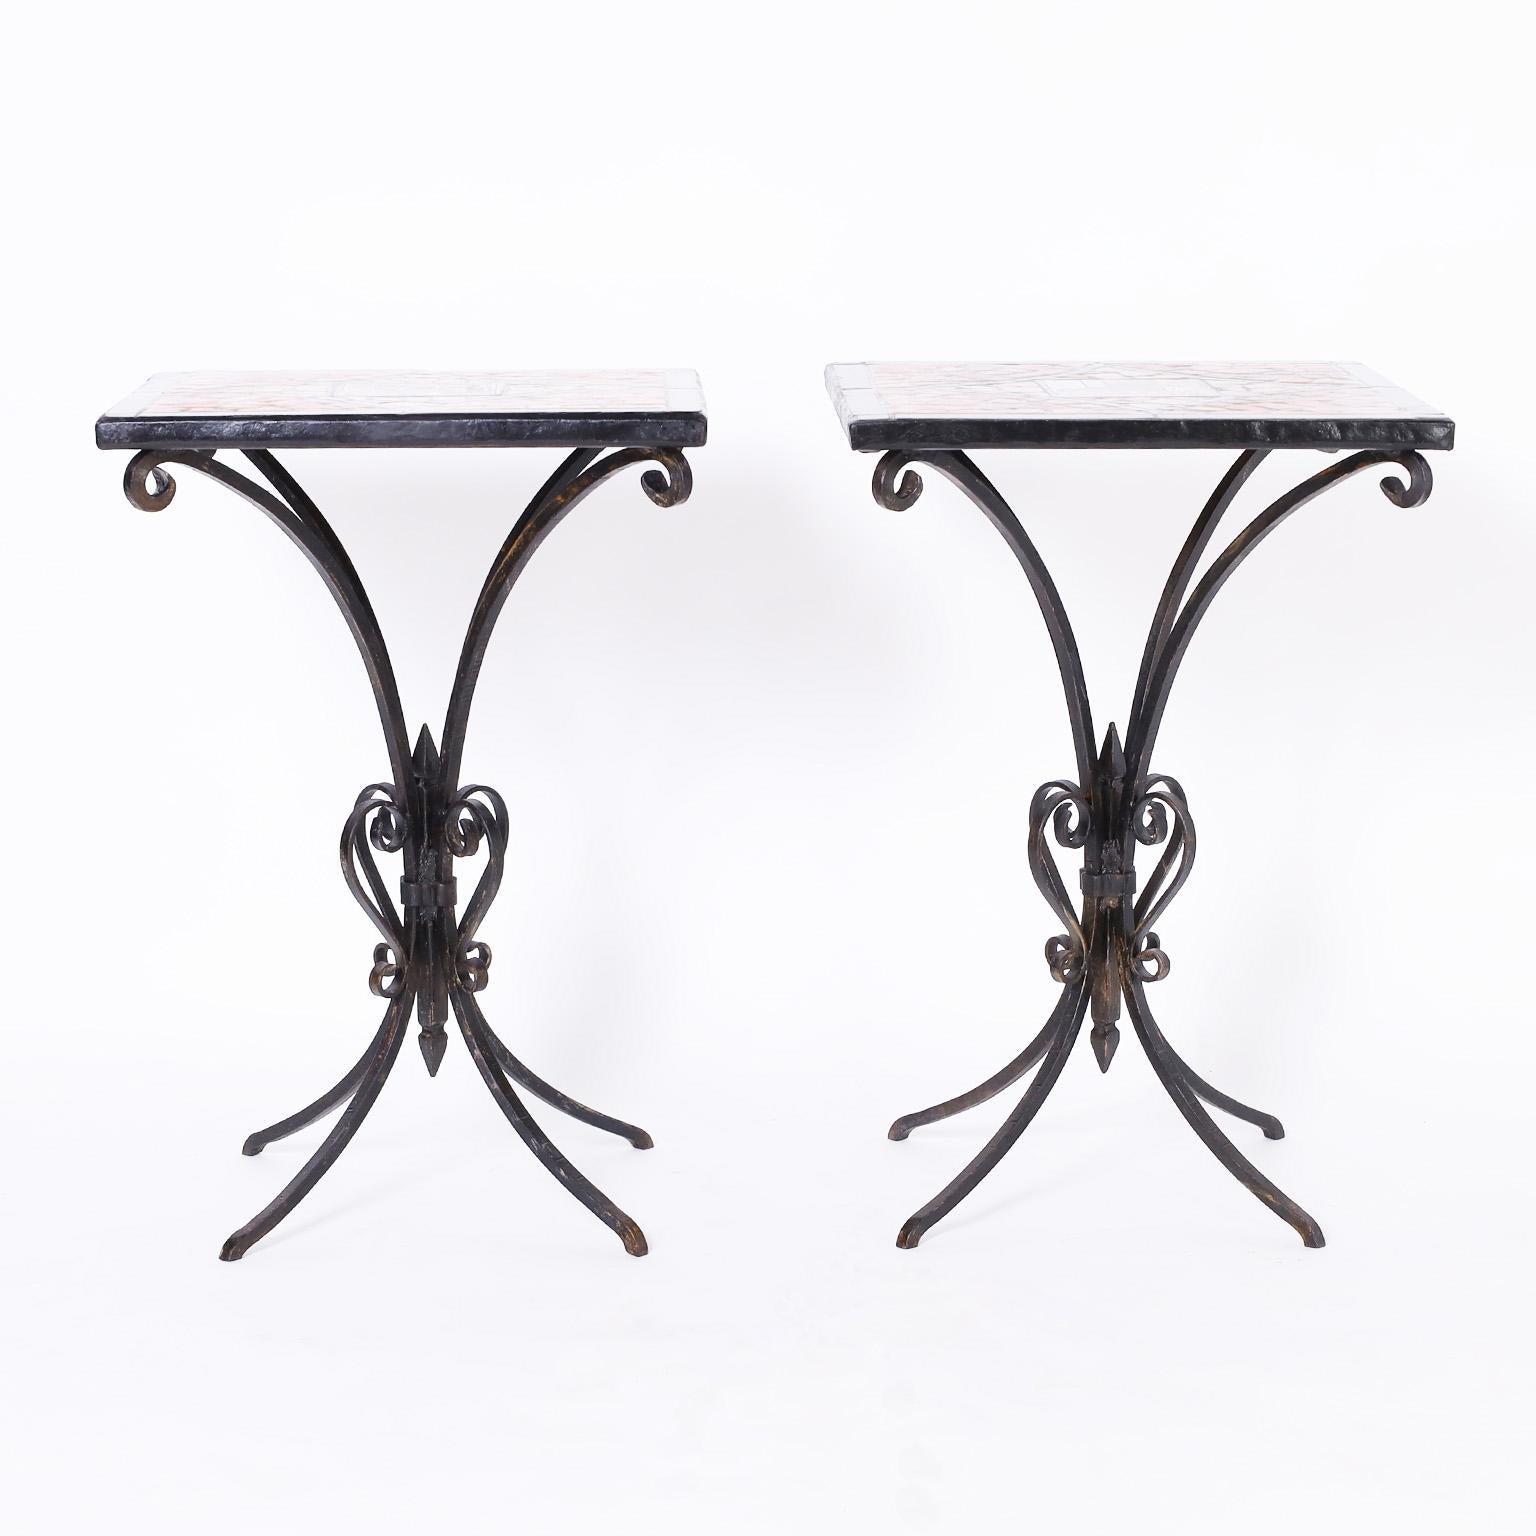 Standout pair of antique French tables or stands with colorful mosaic tiled tops having art nouveau style center tiles. The bases are hand wrought iron in an elegant form.